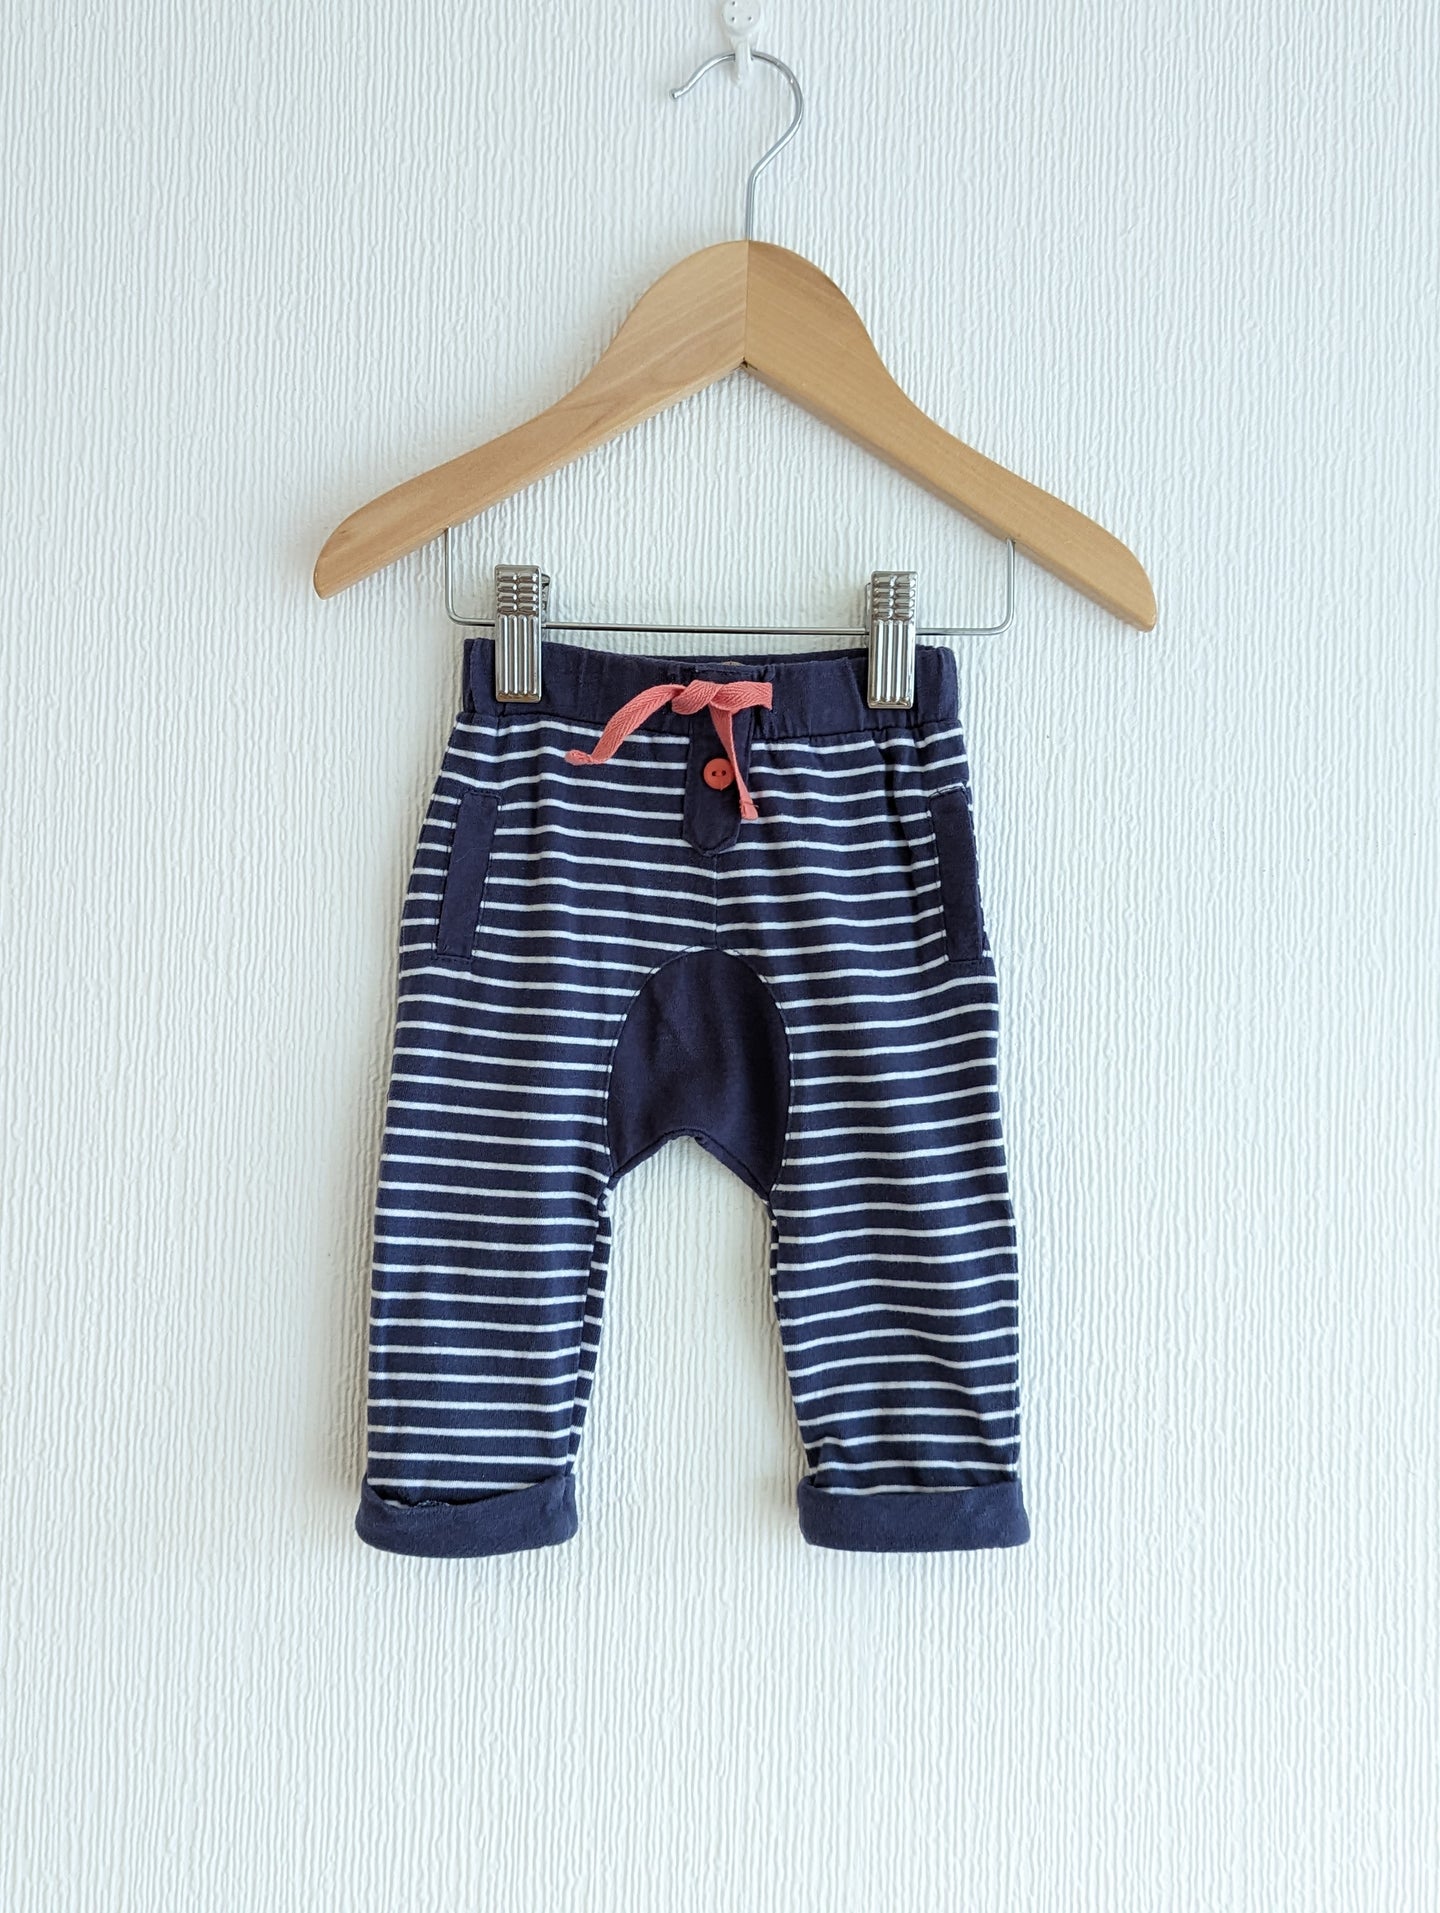 French Striped Comfies - 3 Months